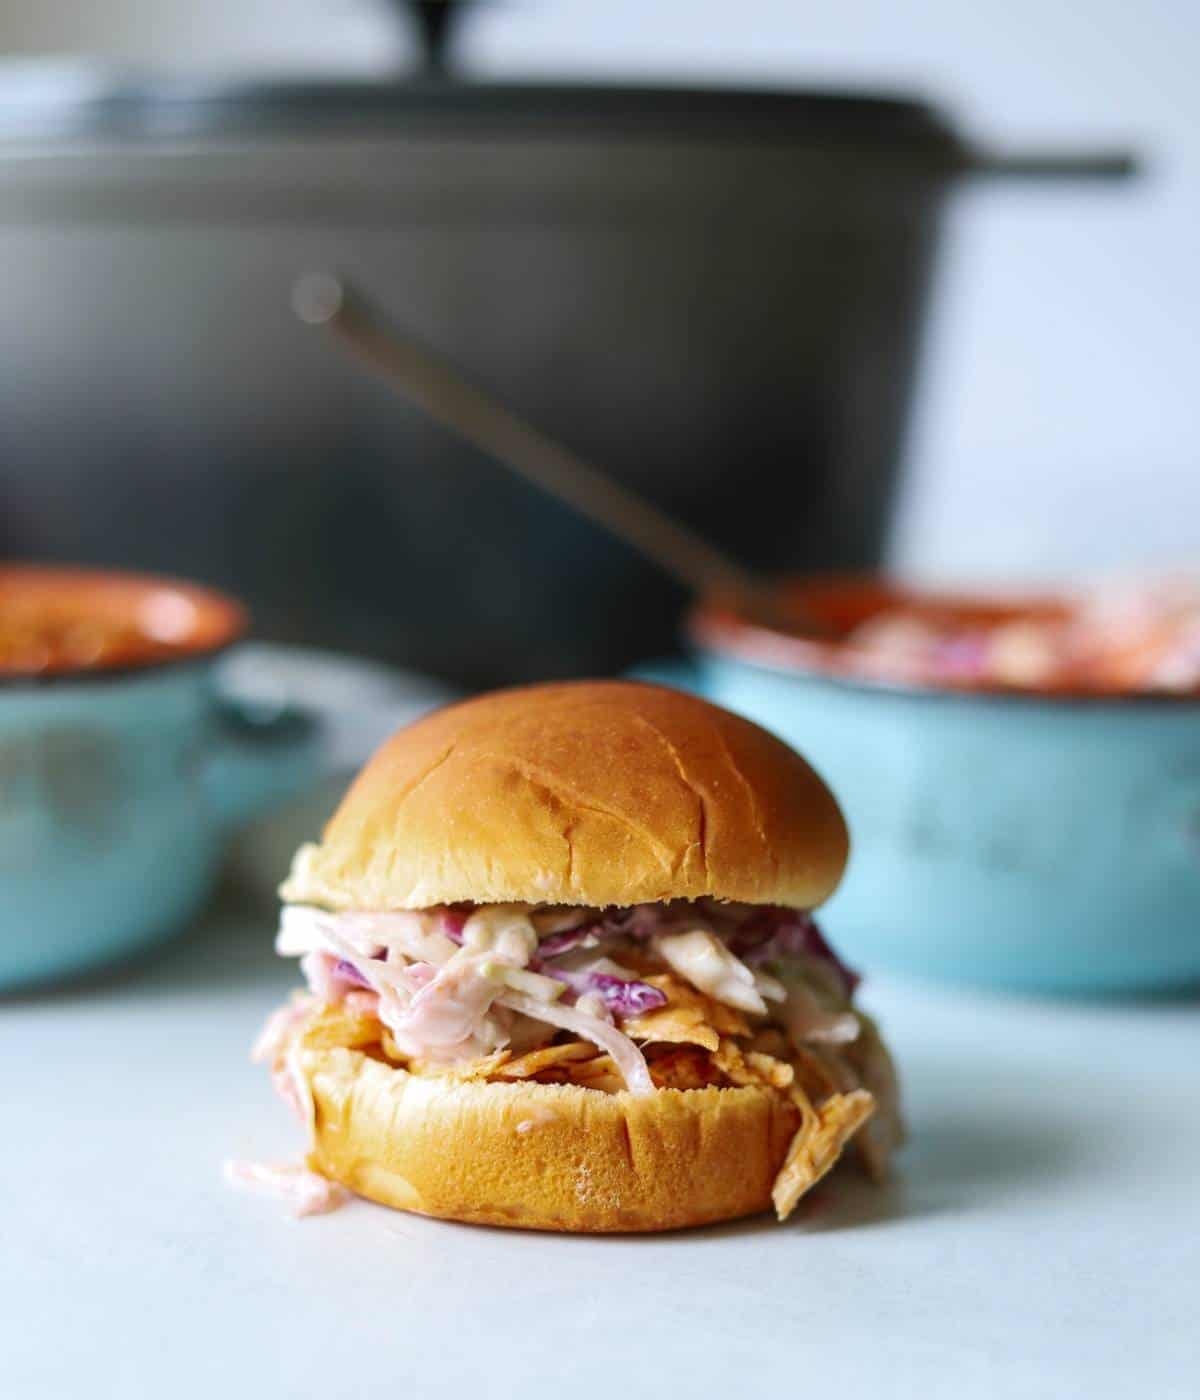 BBQ chicken sandwich topped with slaw with dutch oven in background.